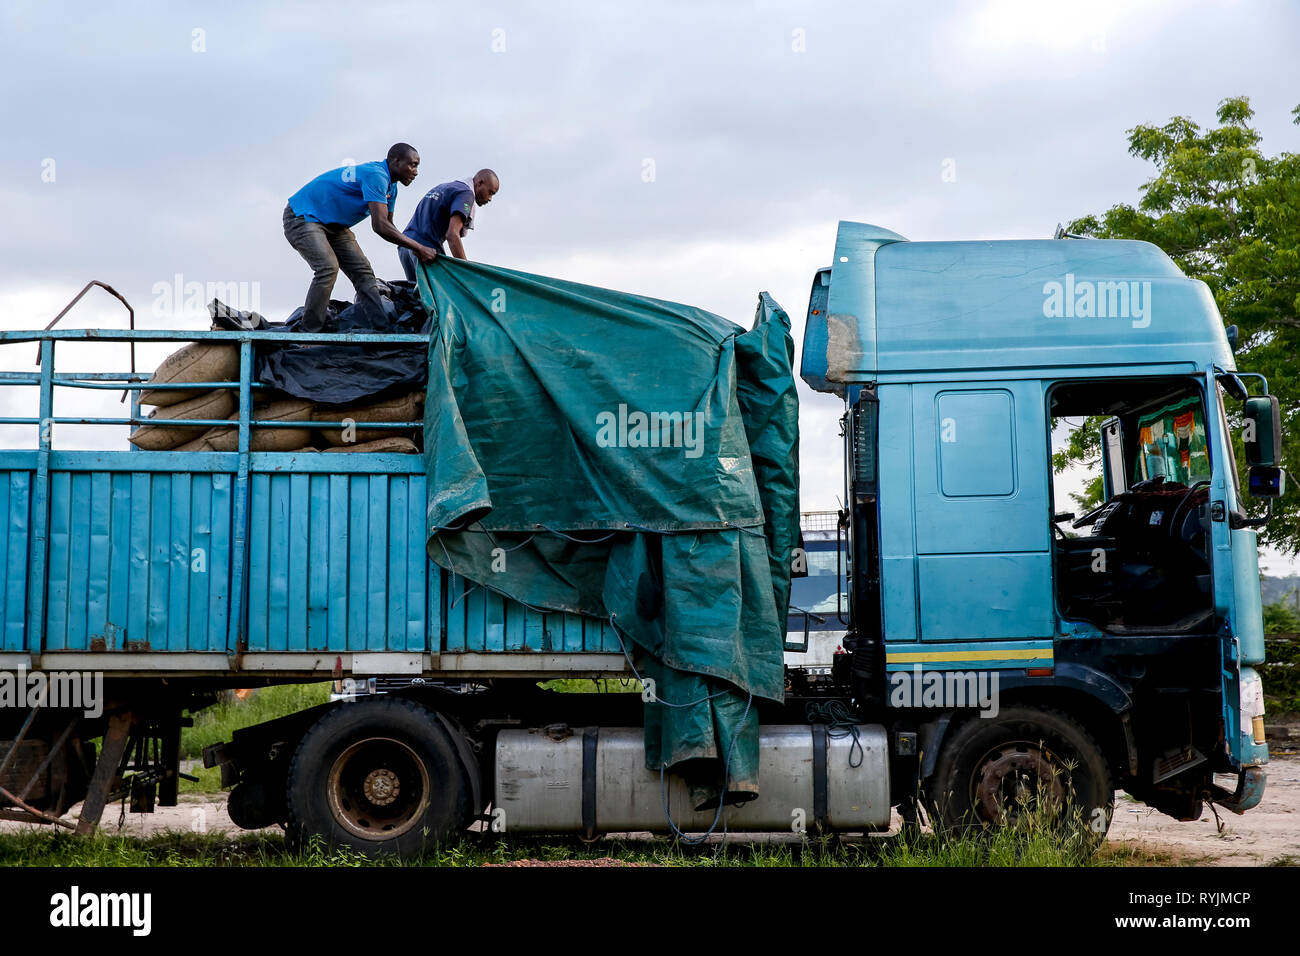 Cocoa carrying truck loaded in Agboville, Ivory Coast. Stock Photo